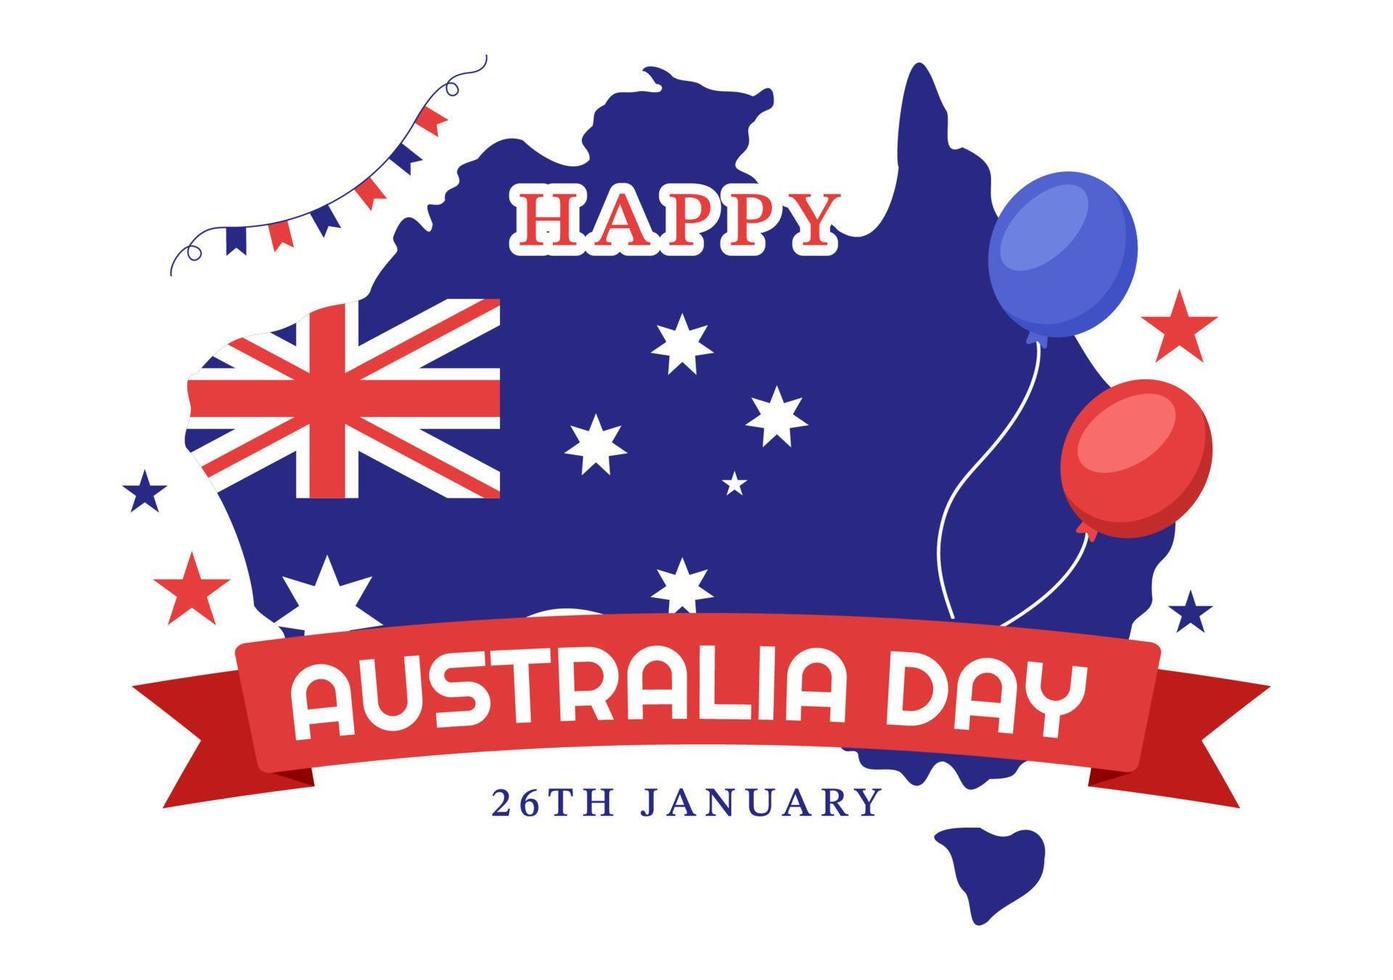 Happy Australia Day Observed Every Year on January 26th with Flags and Map to Diversity of Peoples in Flat Cartoon Hand Drawn Template Illustration vector